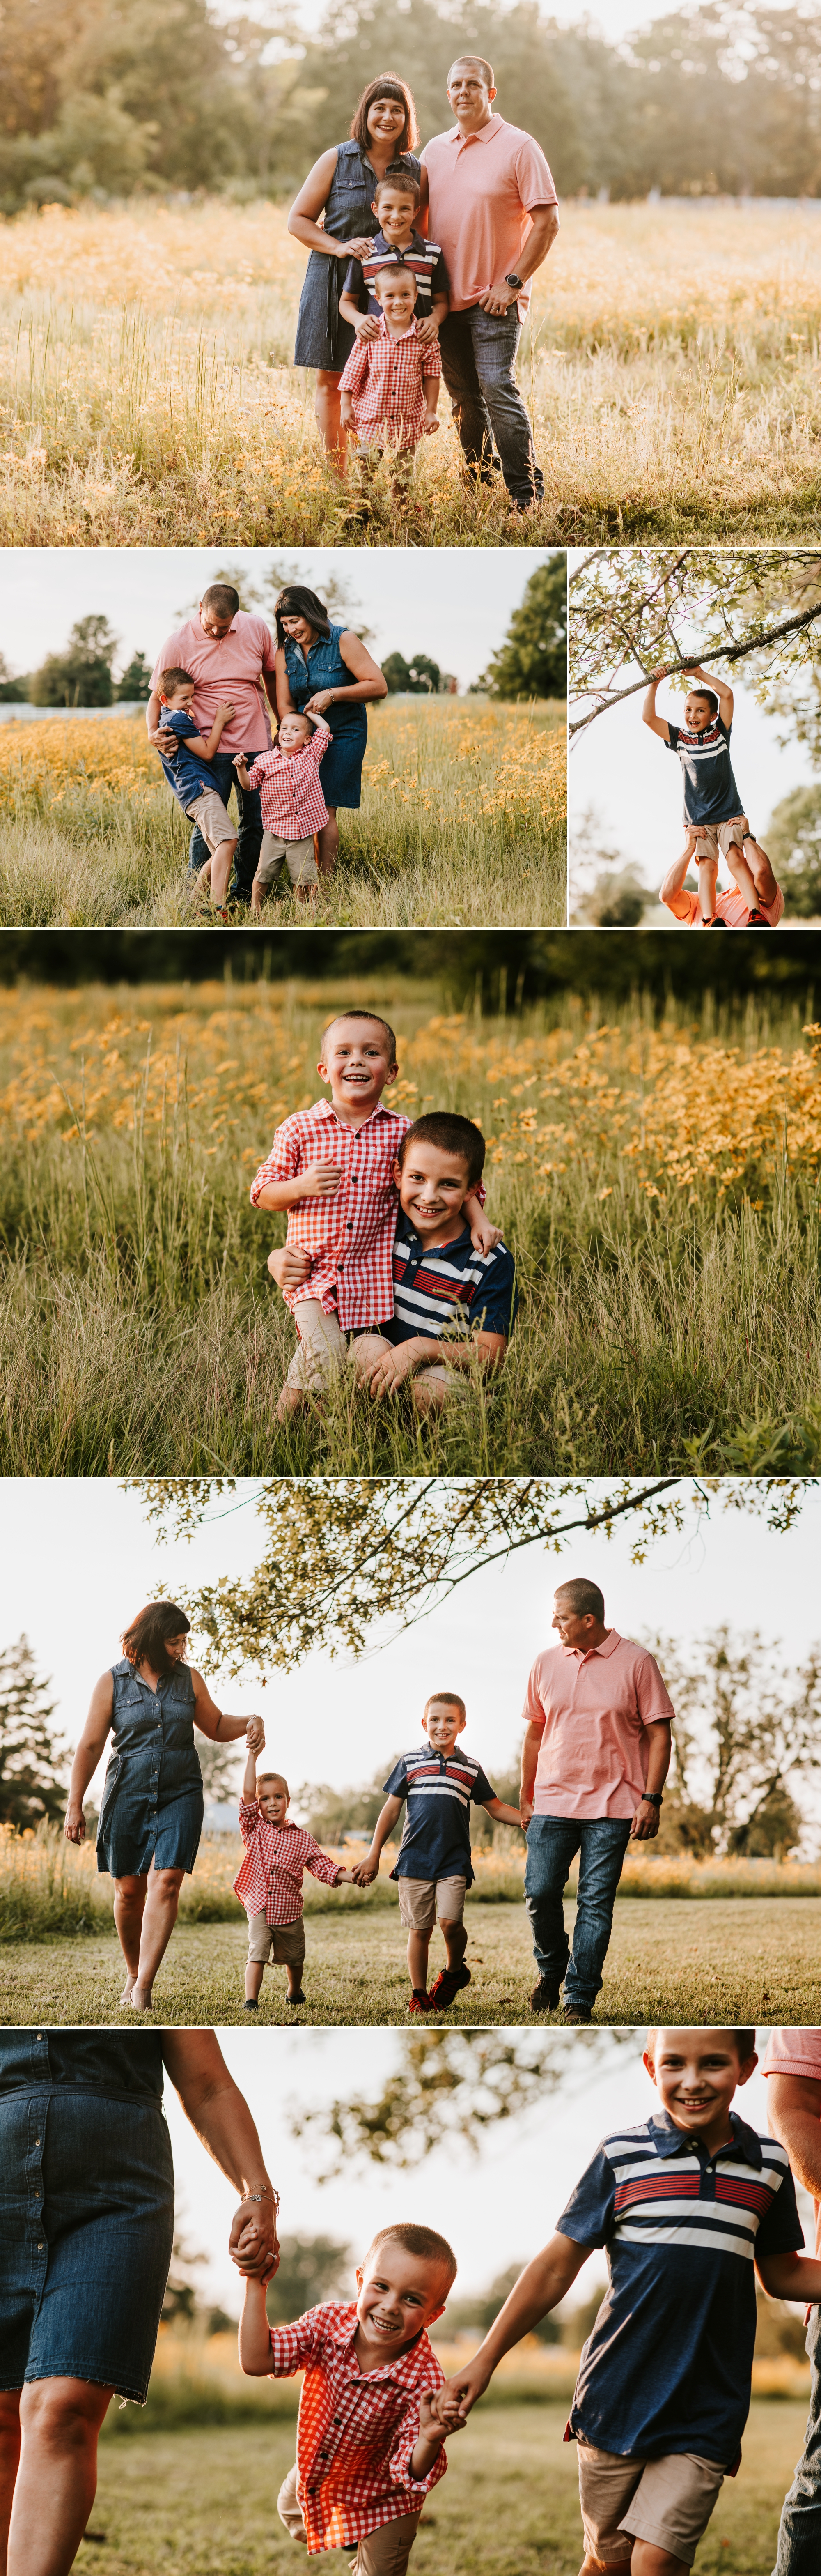 Image of a sunset family session in a field taken by Dana Marquart at Photogenics on Location.